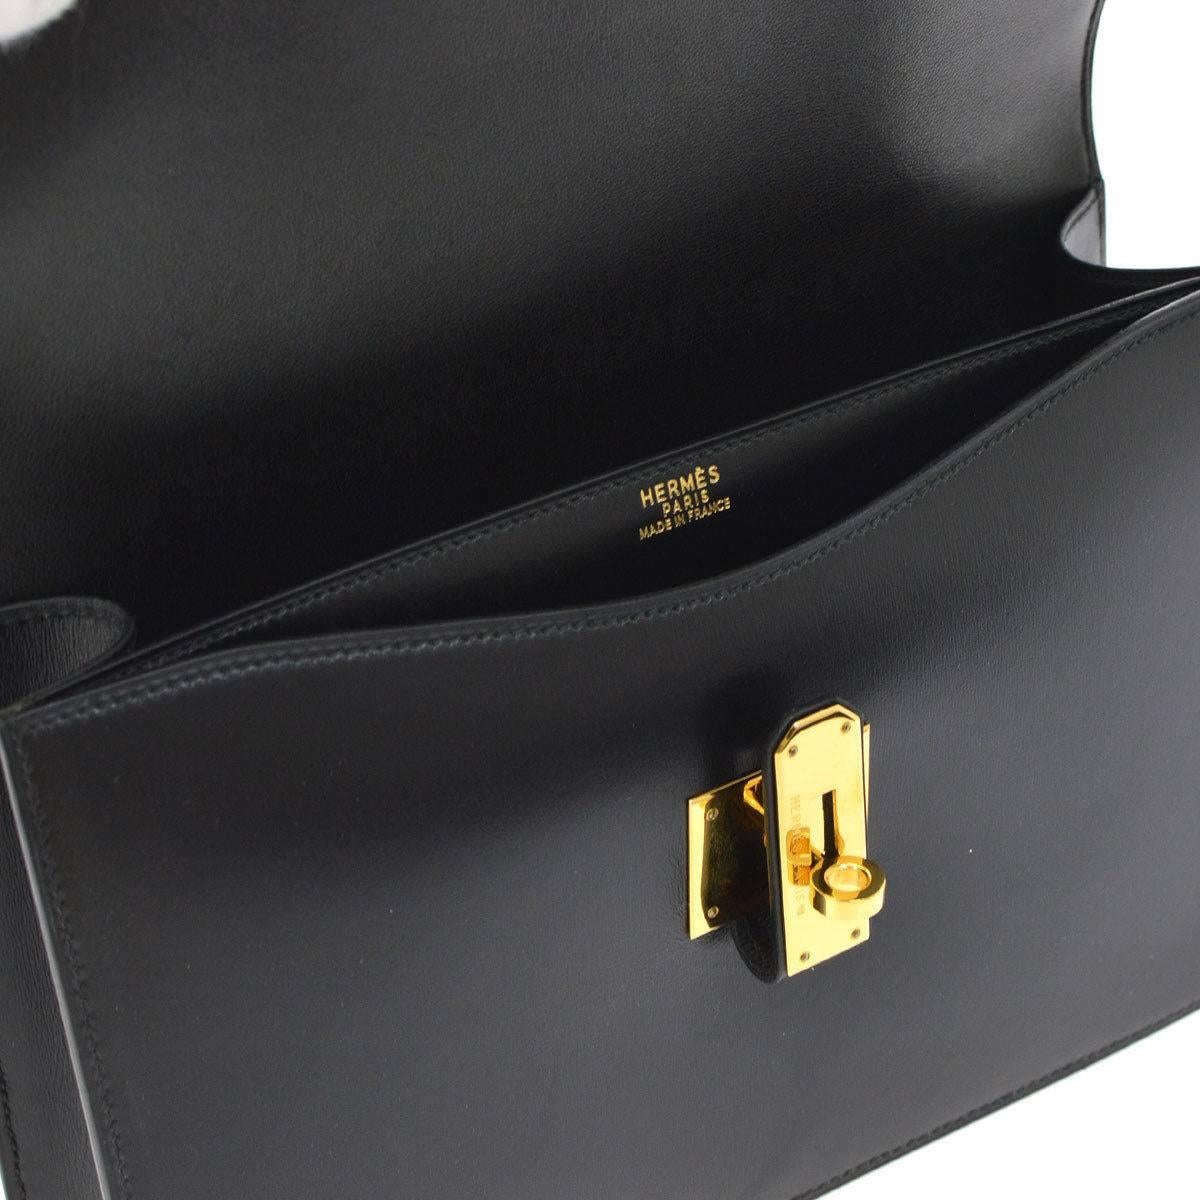 Hermes Black Leather Gold Kelly Style Flip Lock Top Handle Satchel Bag in Box

Leather
Gold tone hardware
Leather lining
Made in France
Handle drop 4